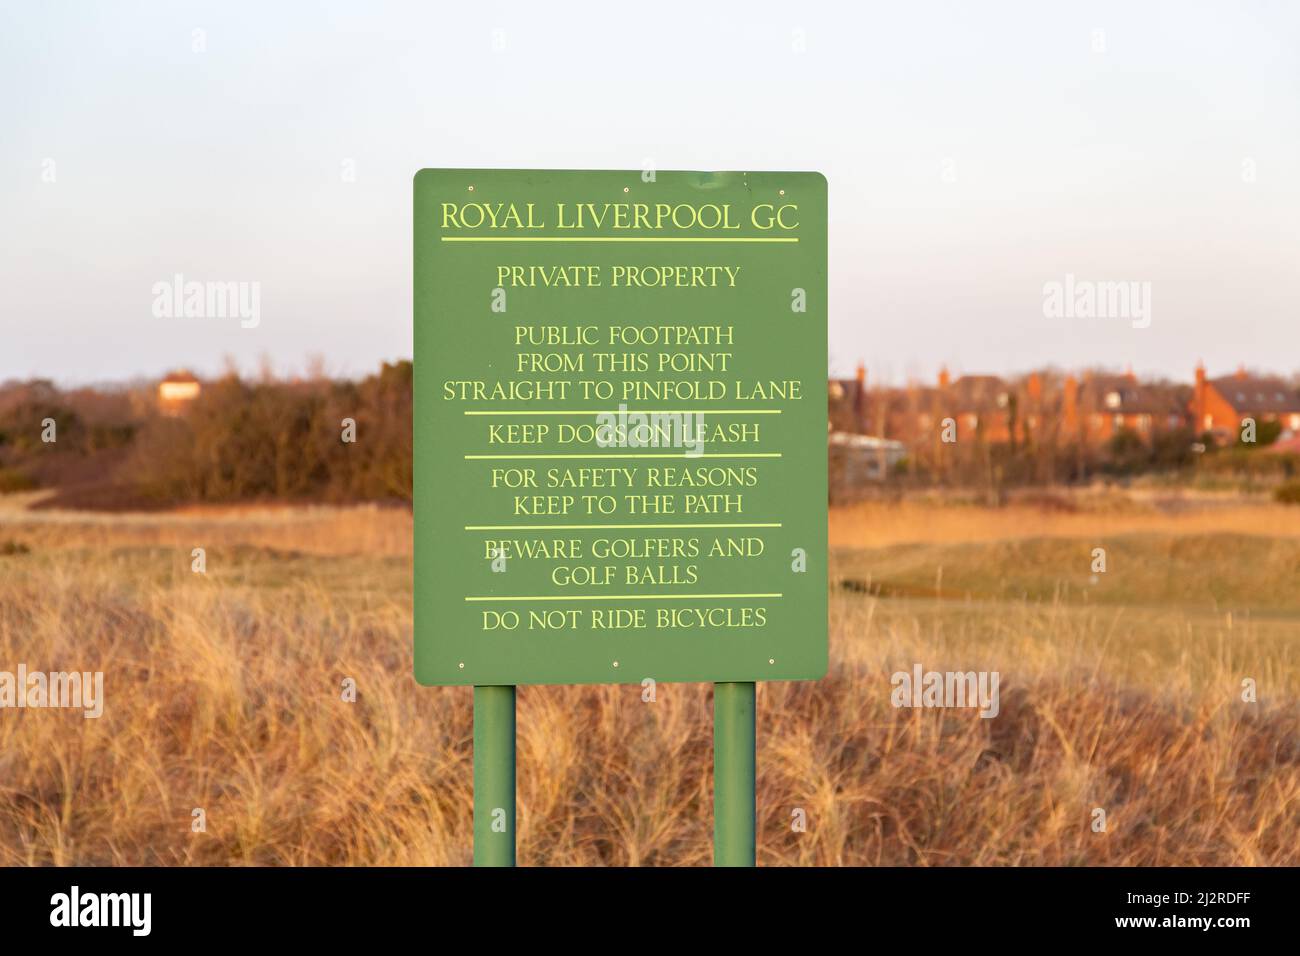 West Kirby, UK: Sign, Royal Liverpool Golf Club Hoylake. Public footpath - keep dogs on leash - no bicycles. Stock Photo